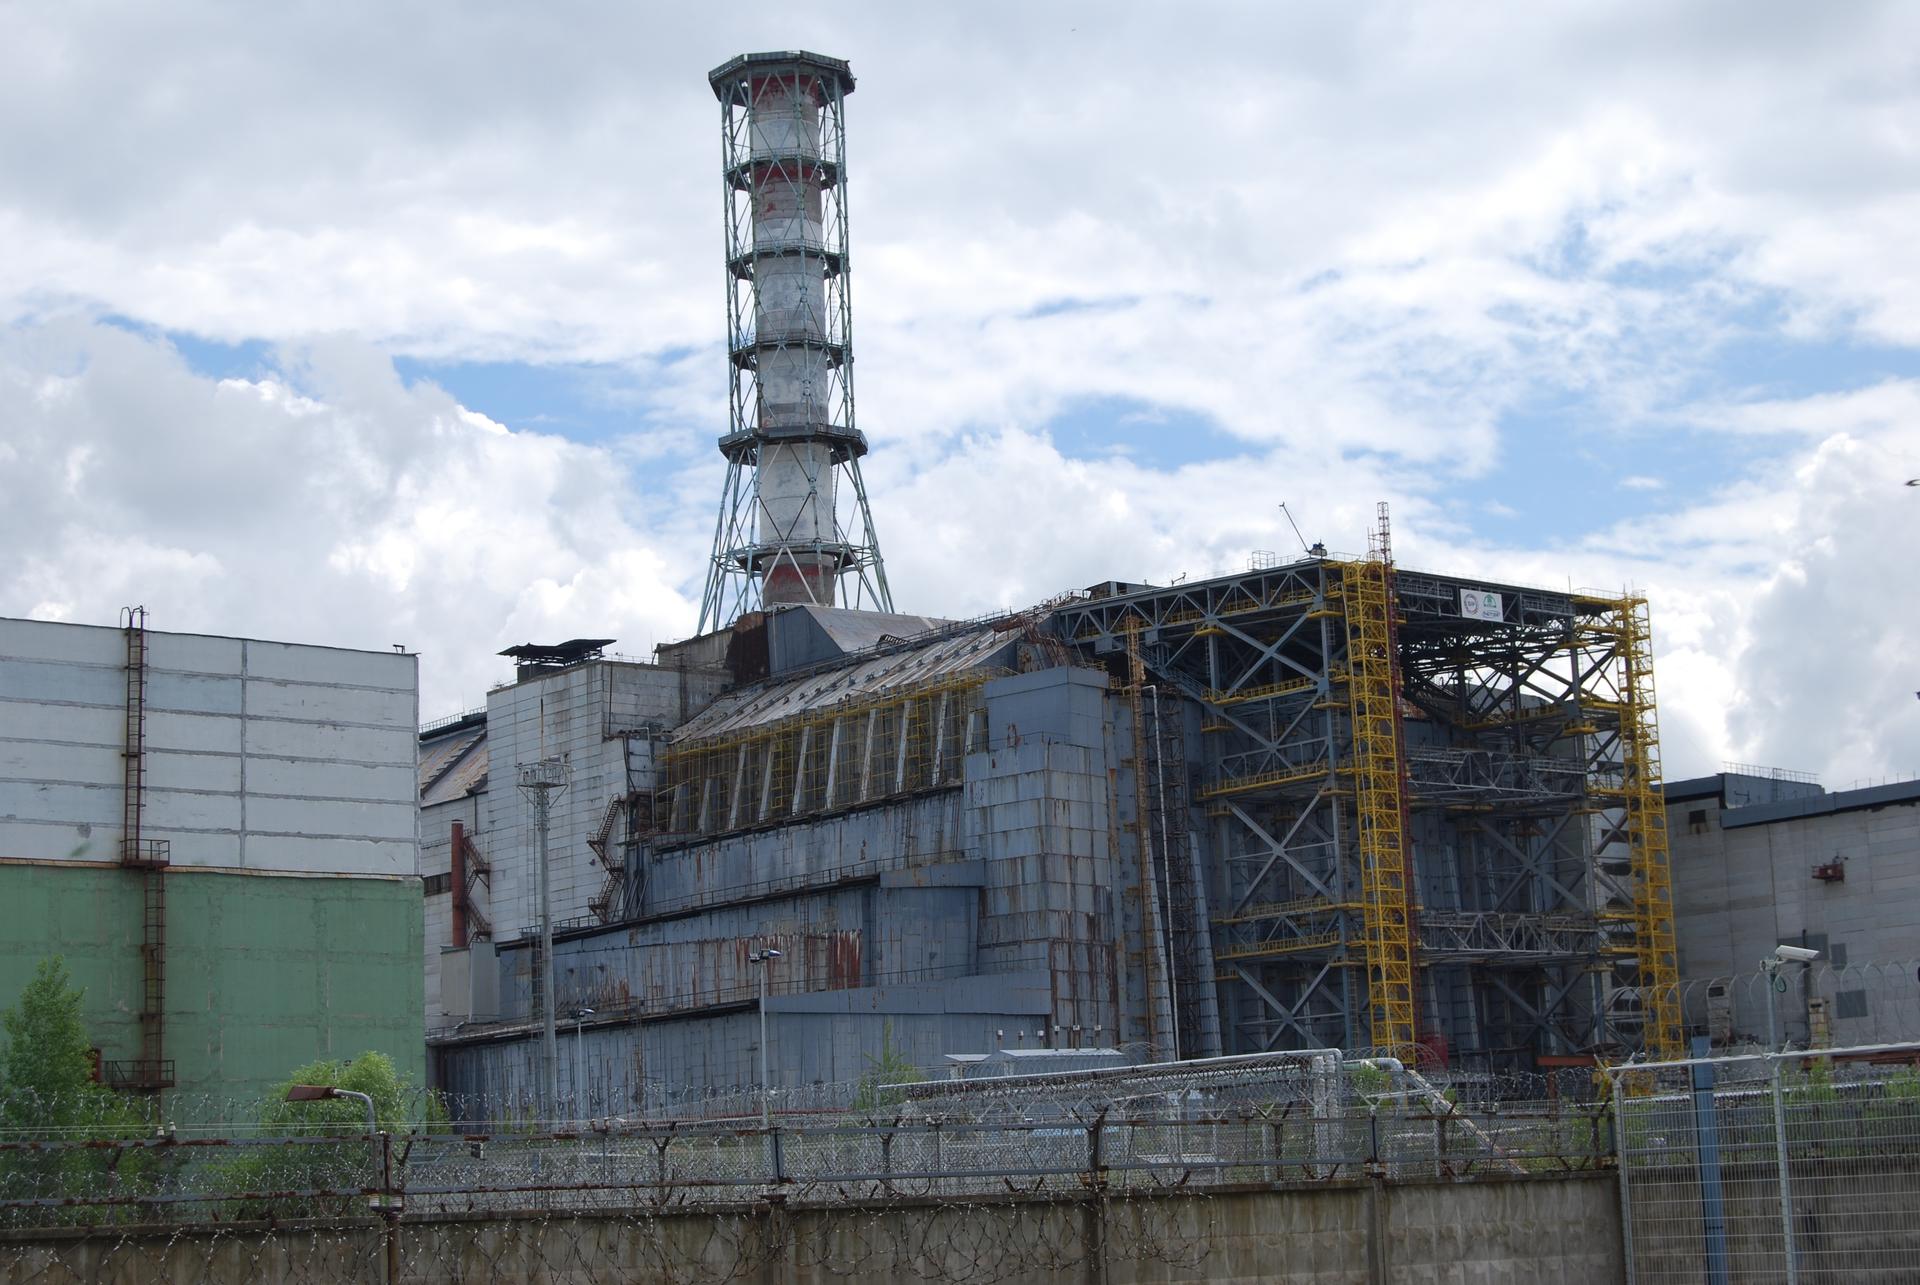 The sarcophagus, a massive steel and concrete structure, covers nuclear reactor 4 at the Chernobyl Nuclear Power Plant. The shell was designed to limit further radioactive contamination.